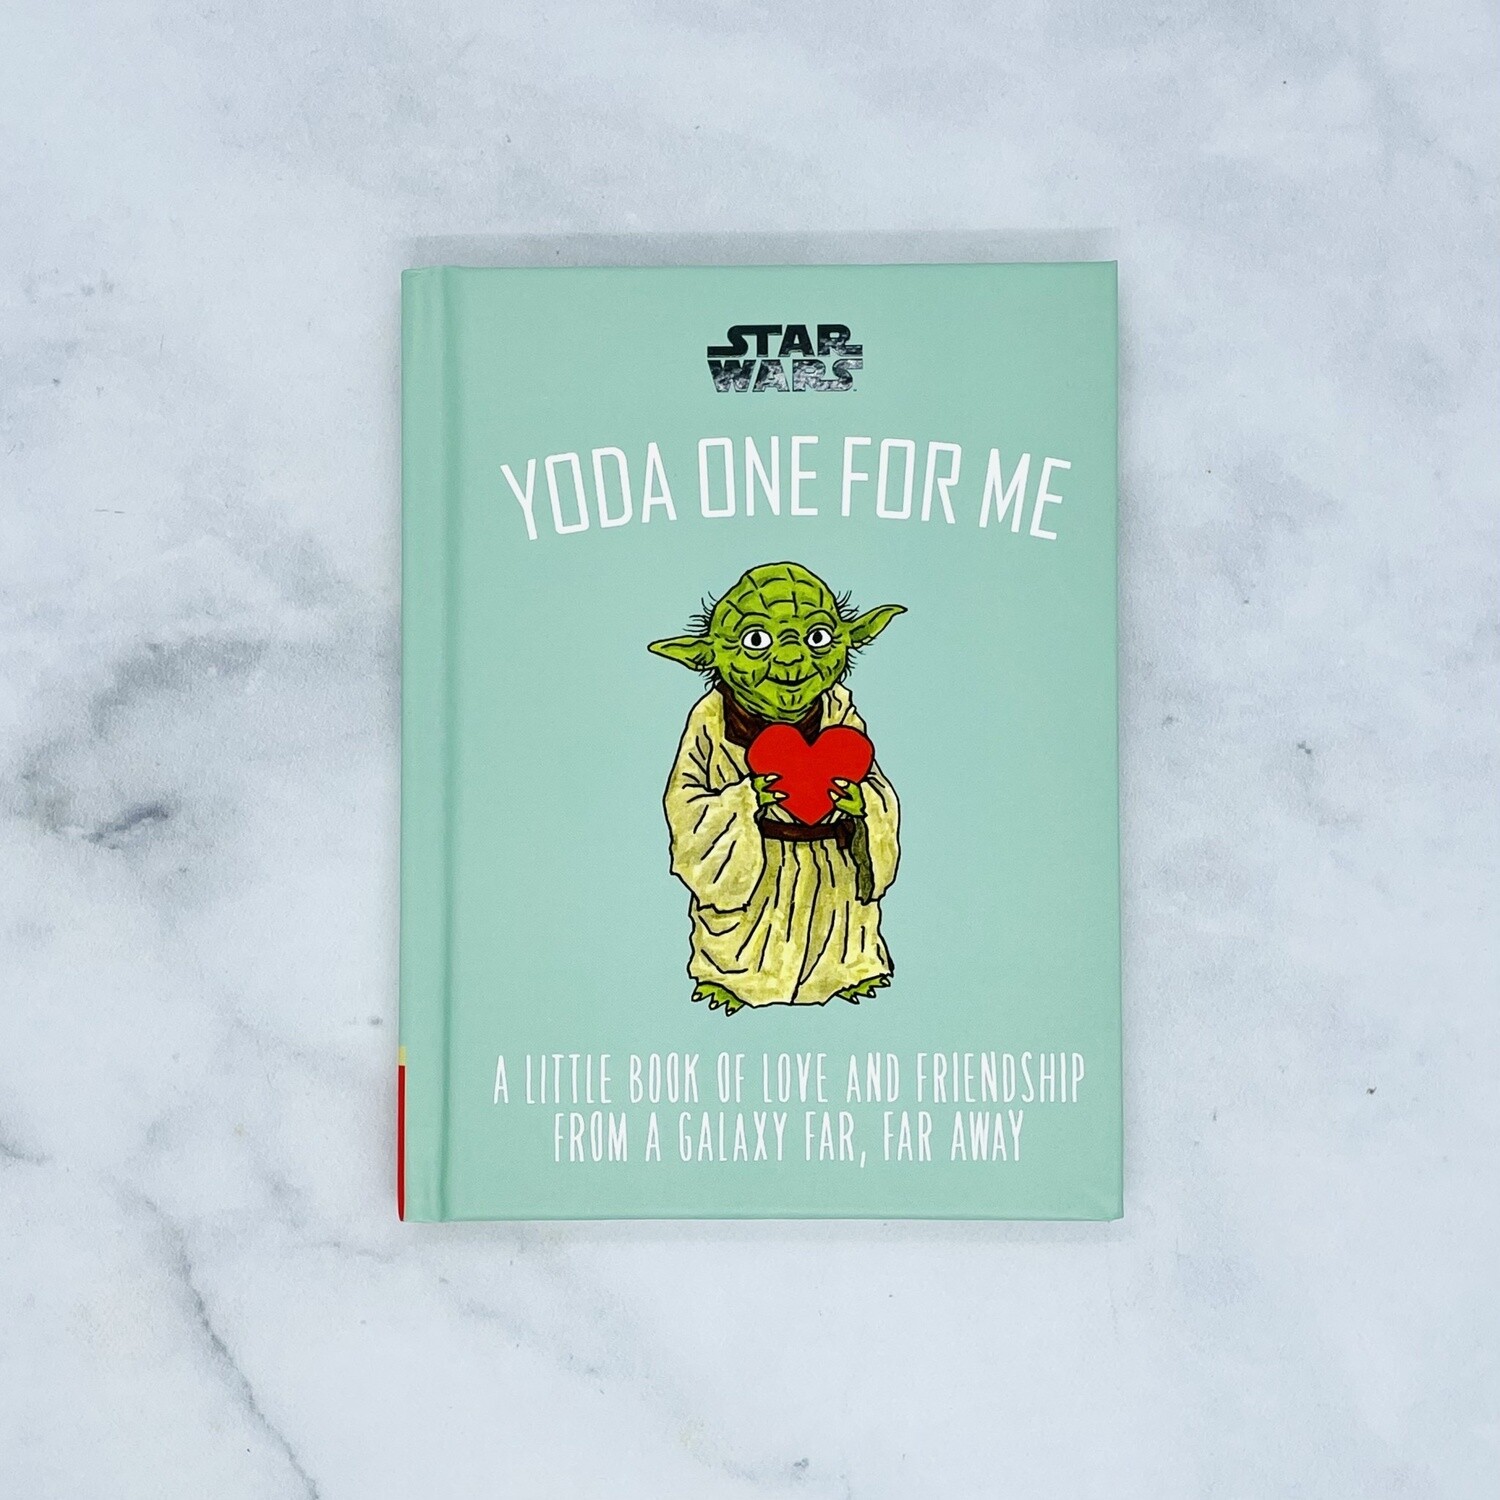 Star Wars: Yoda One For Me